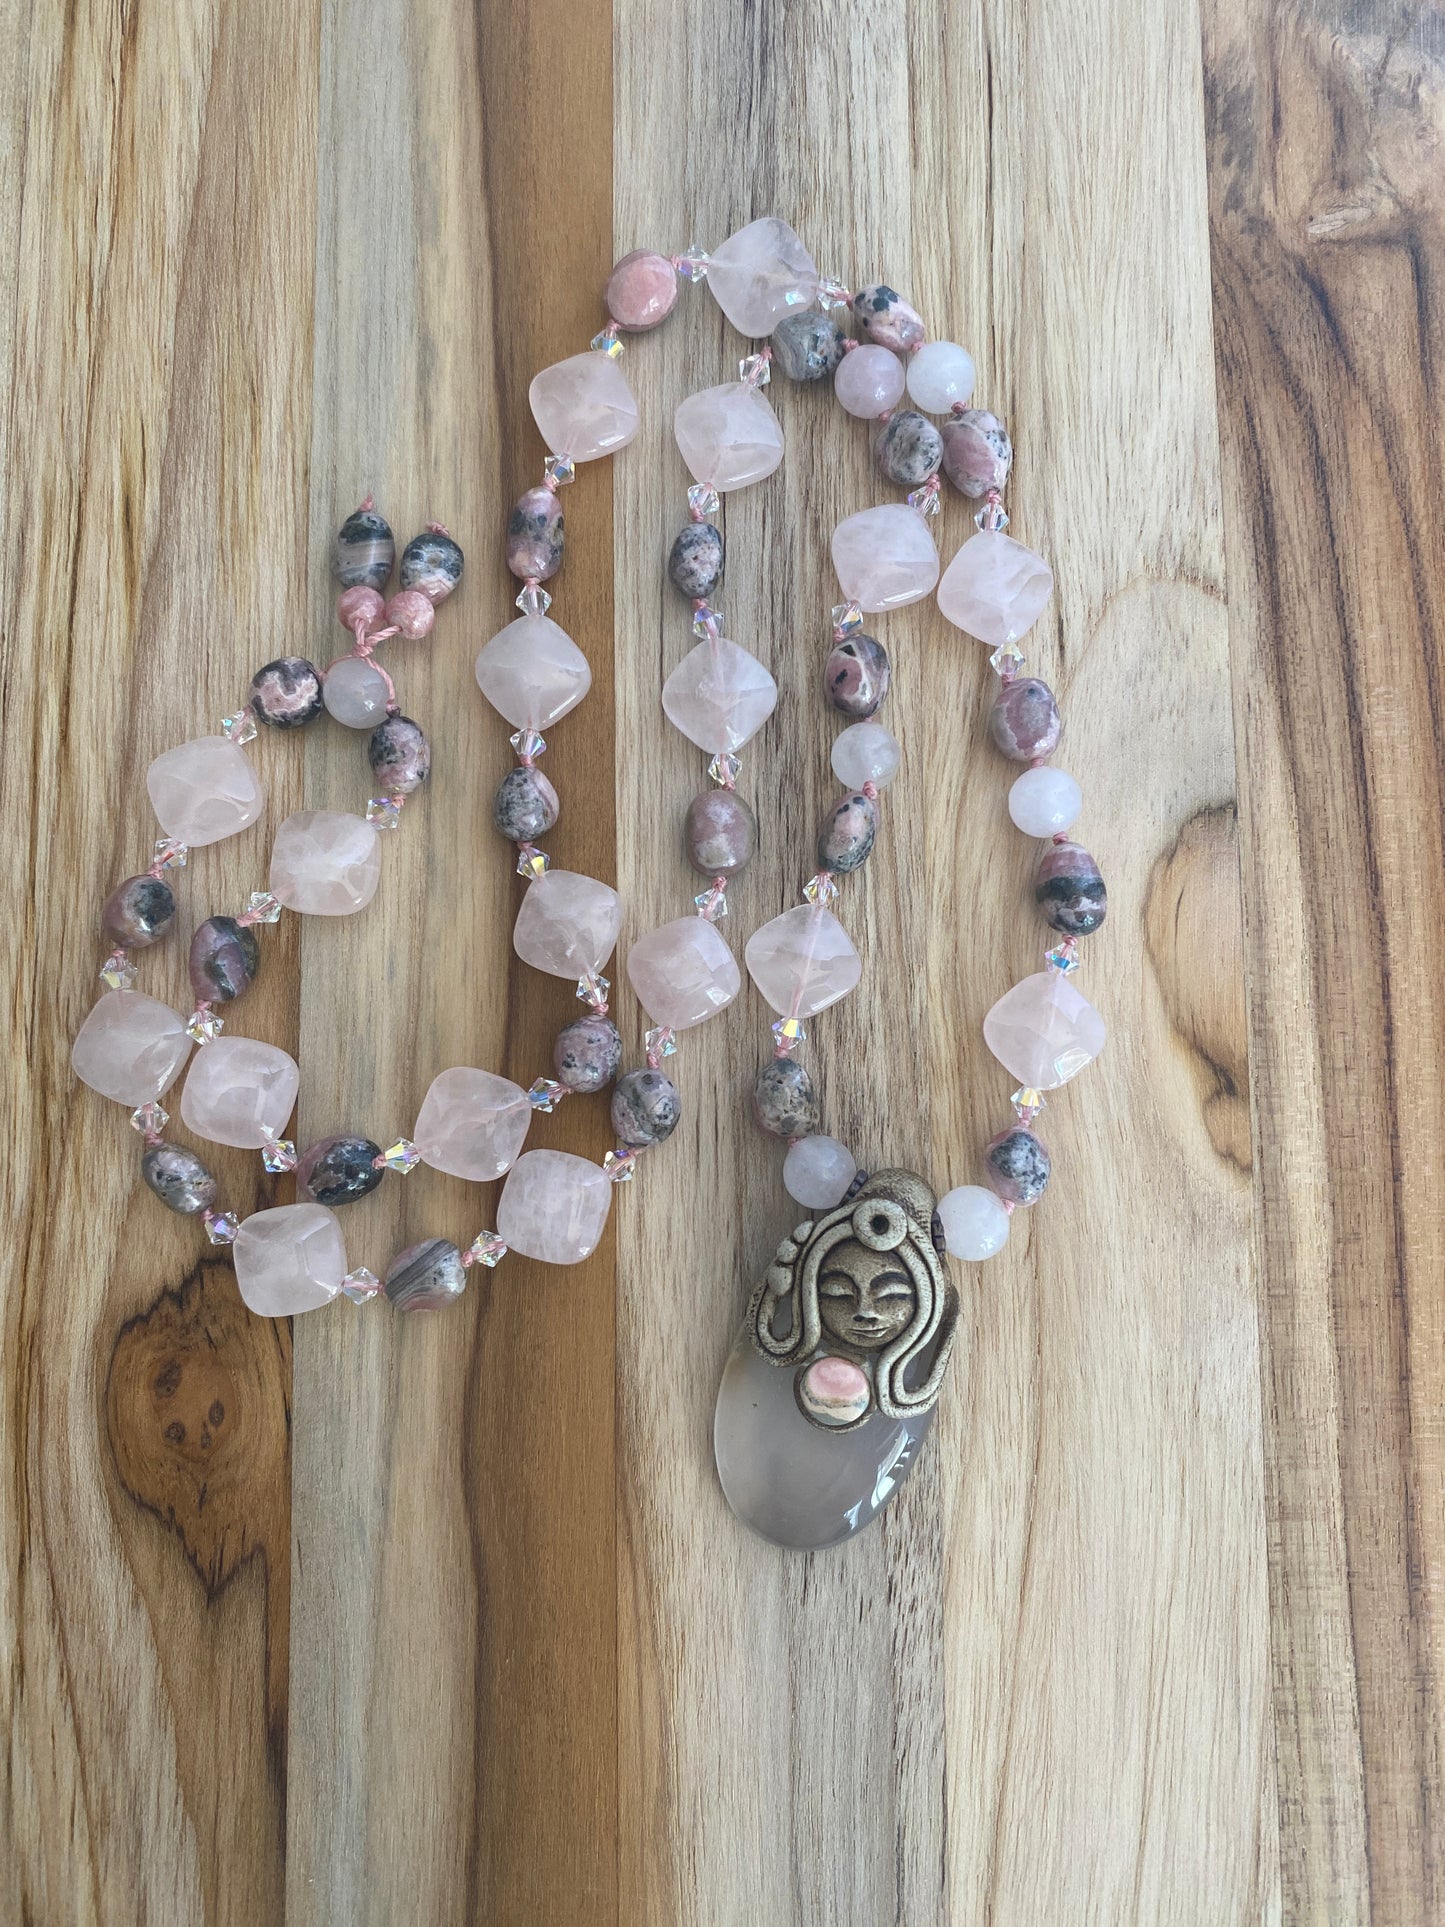 28" Long Polymer Clay Pendant Necklace with Rose Quartz, Rhodonite & Swarovski Crystal Beads